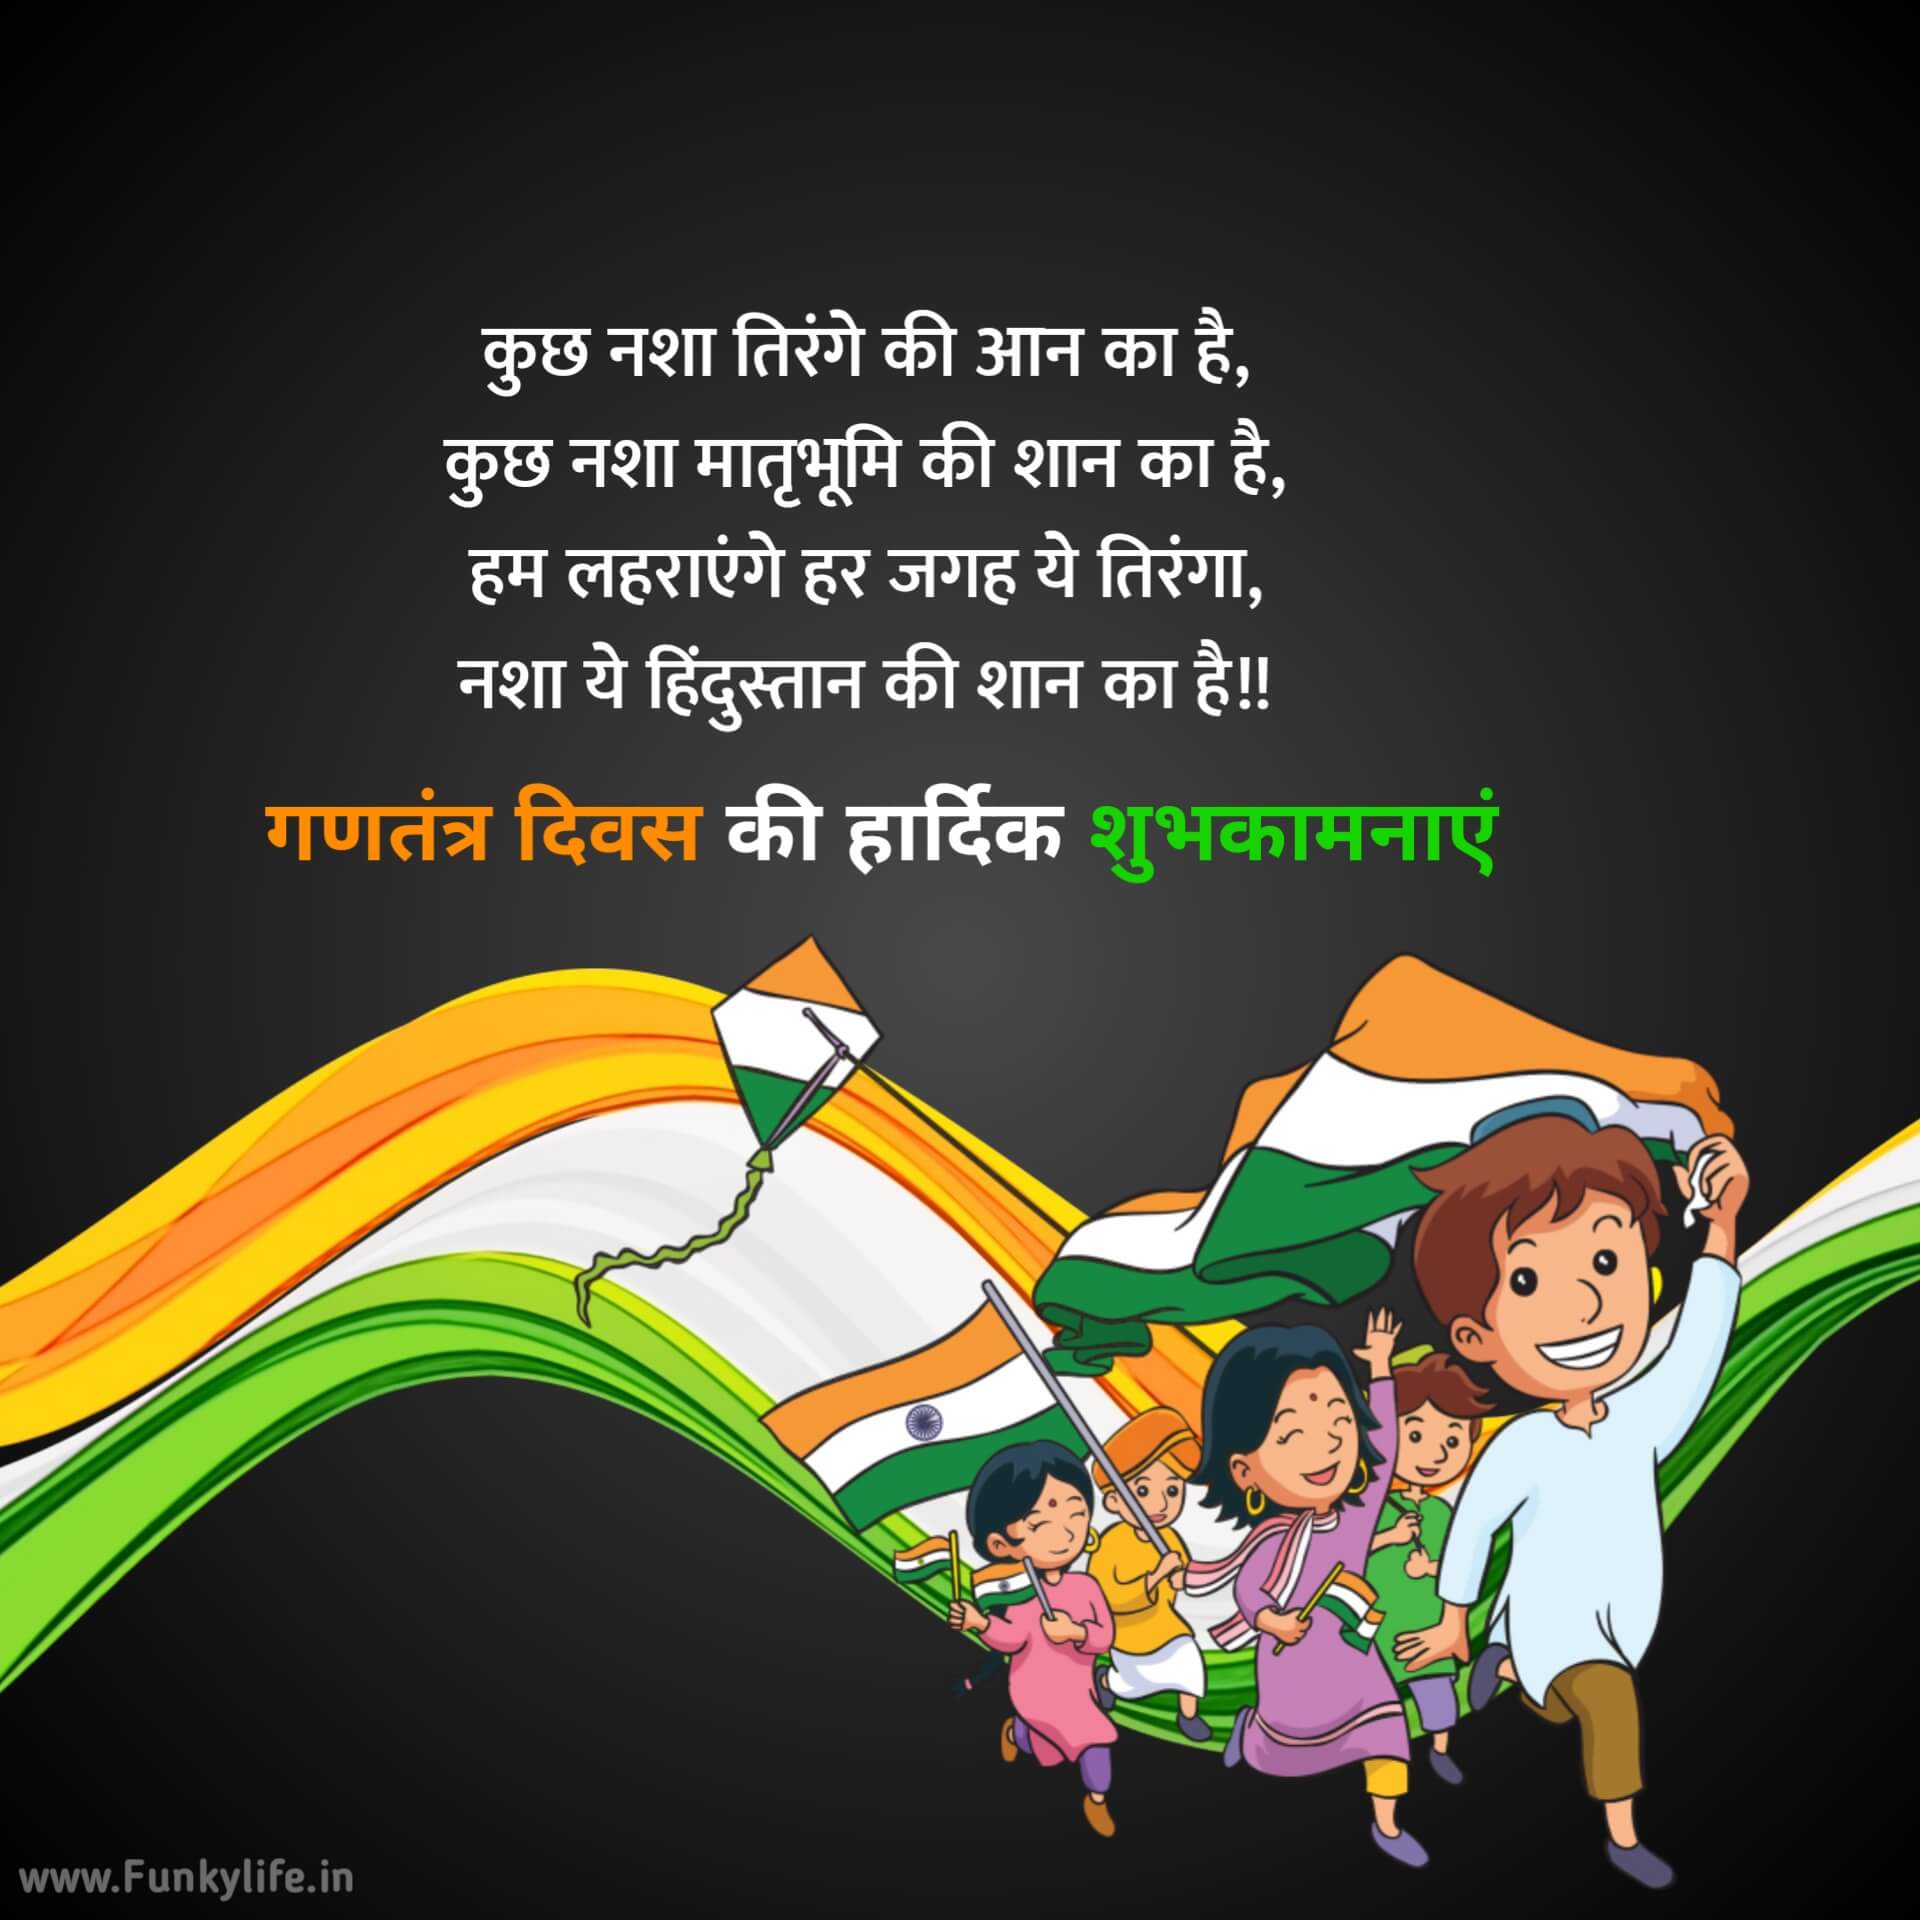 Republic Day Wishes in Hindi